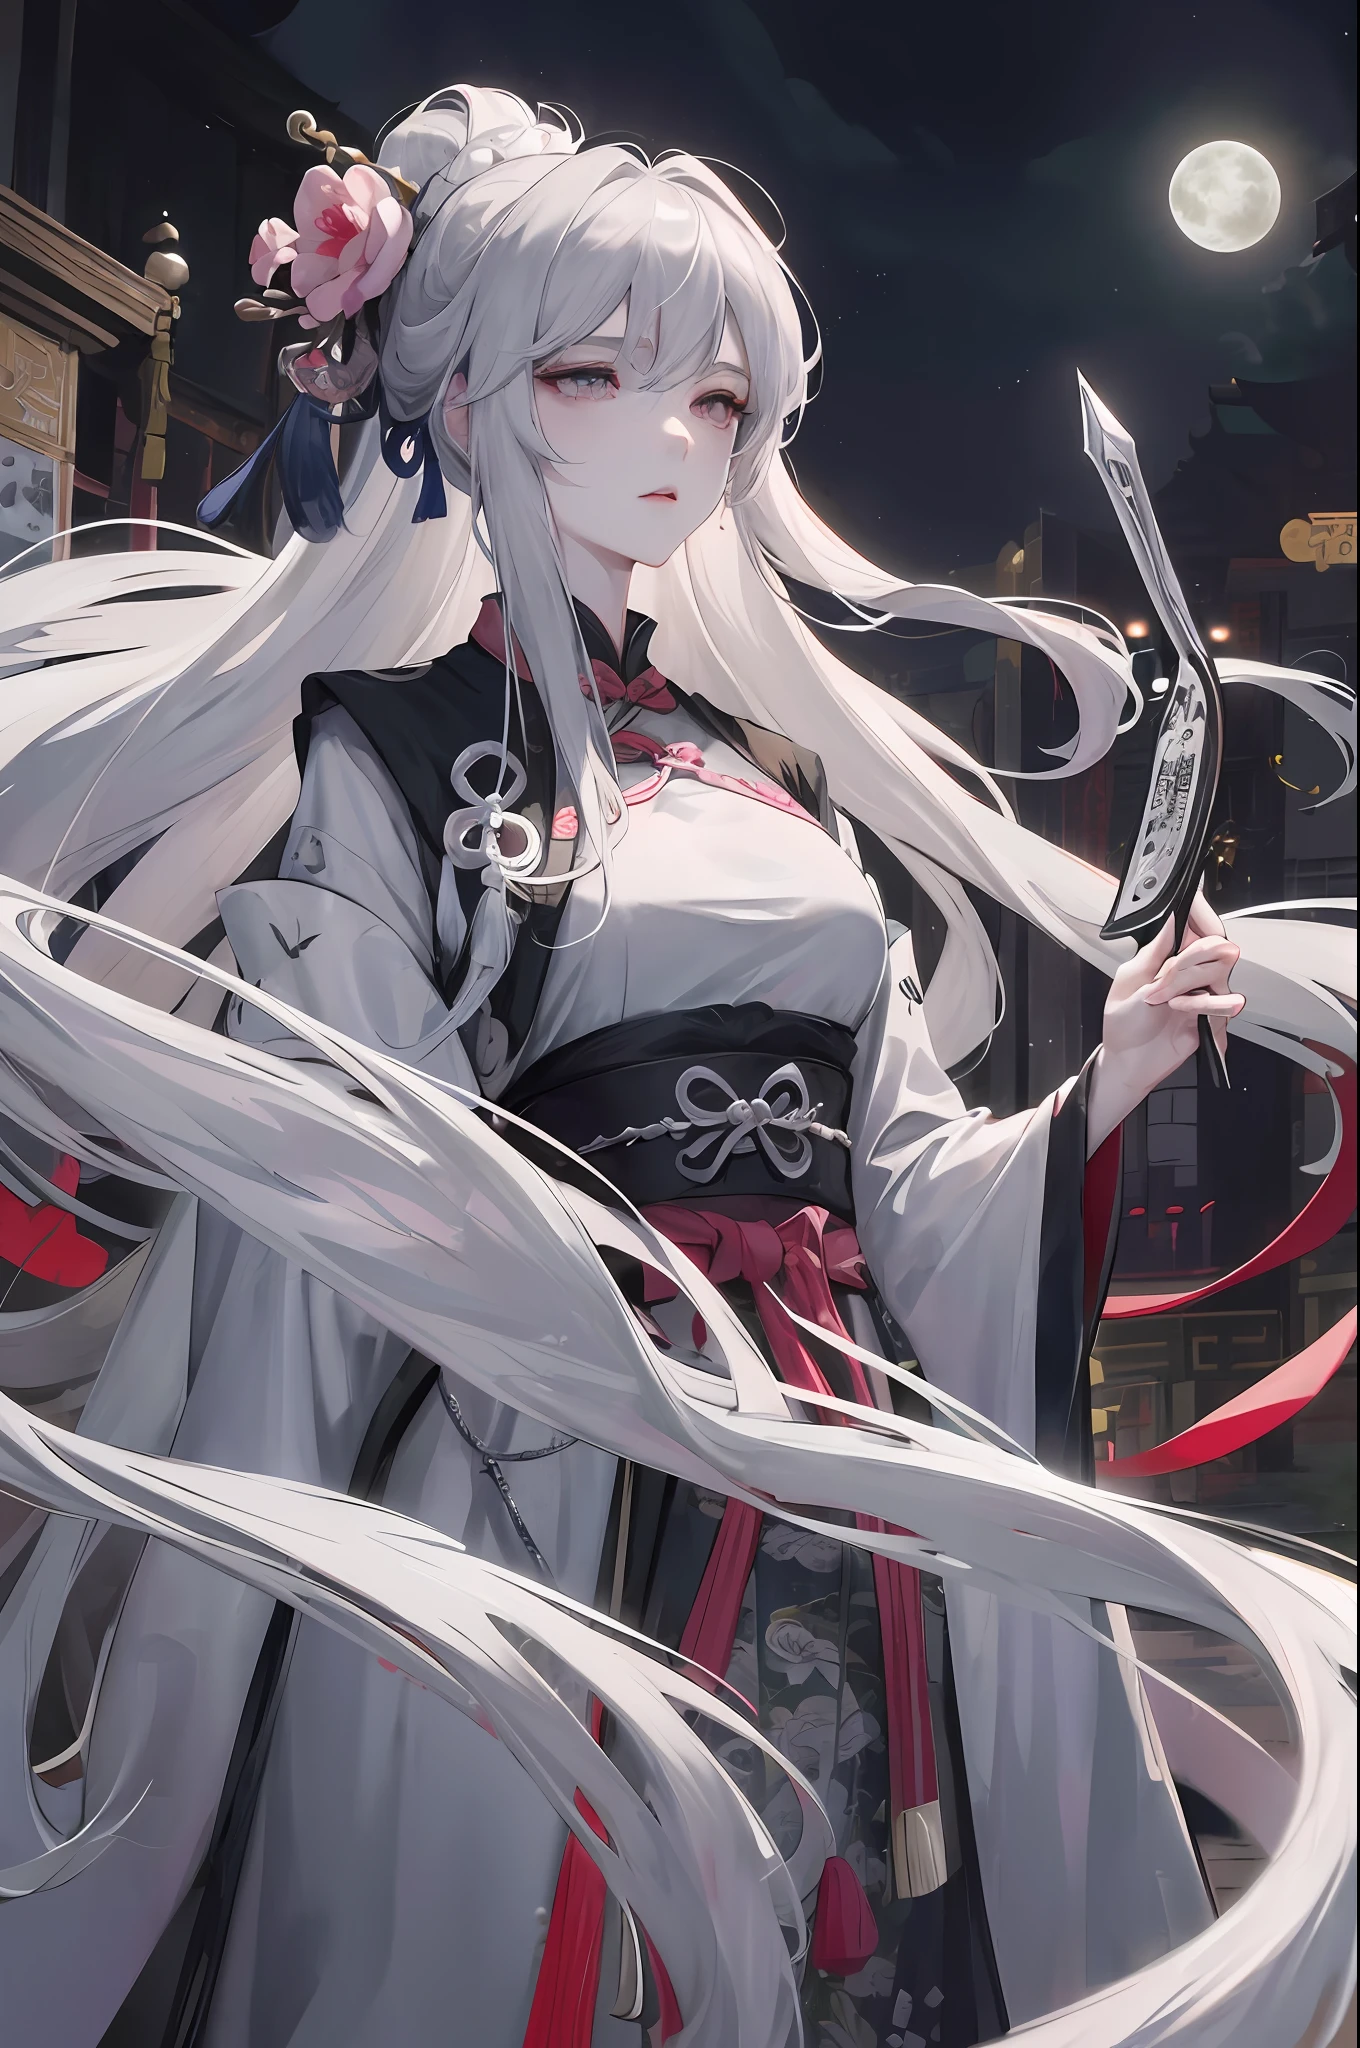 Masterpiece, Best, Night, Full Moon, 1 Female, Mature Woman, Chinese Style, Ancient China, Elder Sister, Royal Sister, Cold Face, Expressionless, Silver White Long Haired Woman, Pale Pink Lips, Calm, Intellectual, Three Belts, Gray Hitomi, assassin, dagger, flower ball background, street view